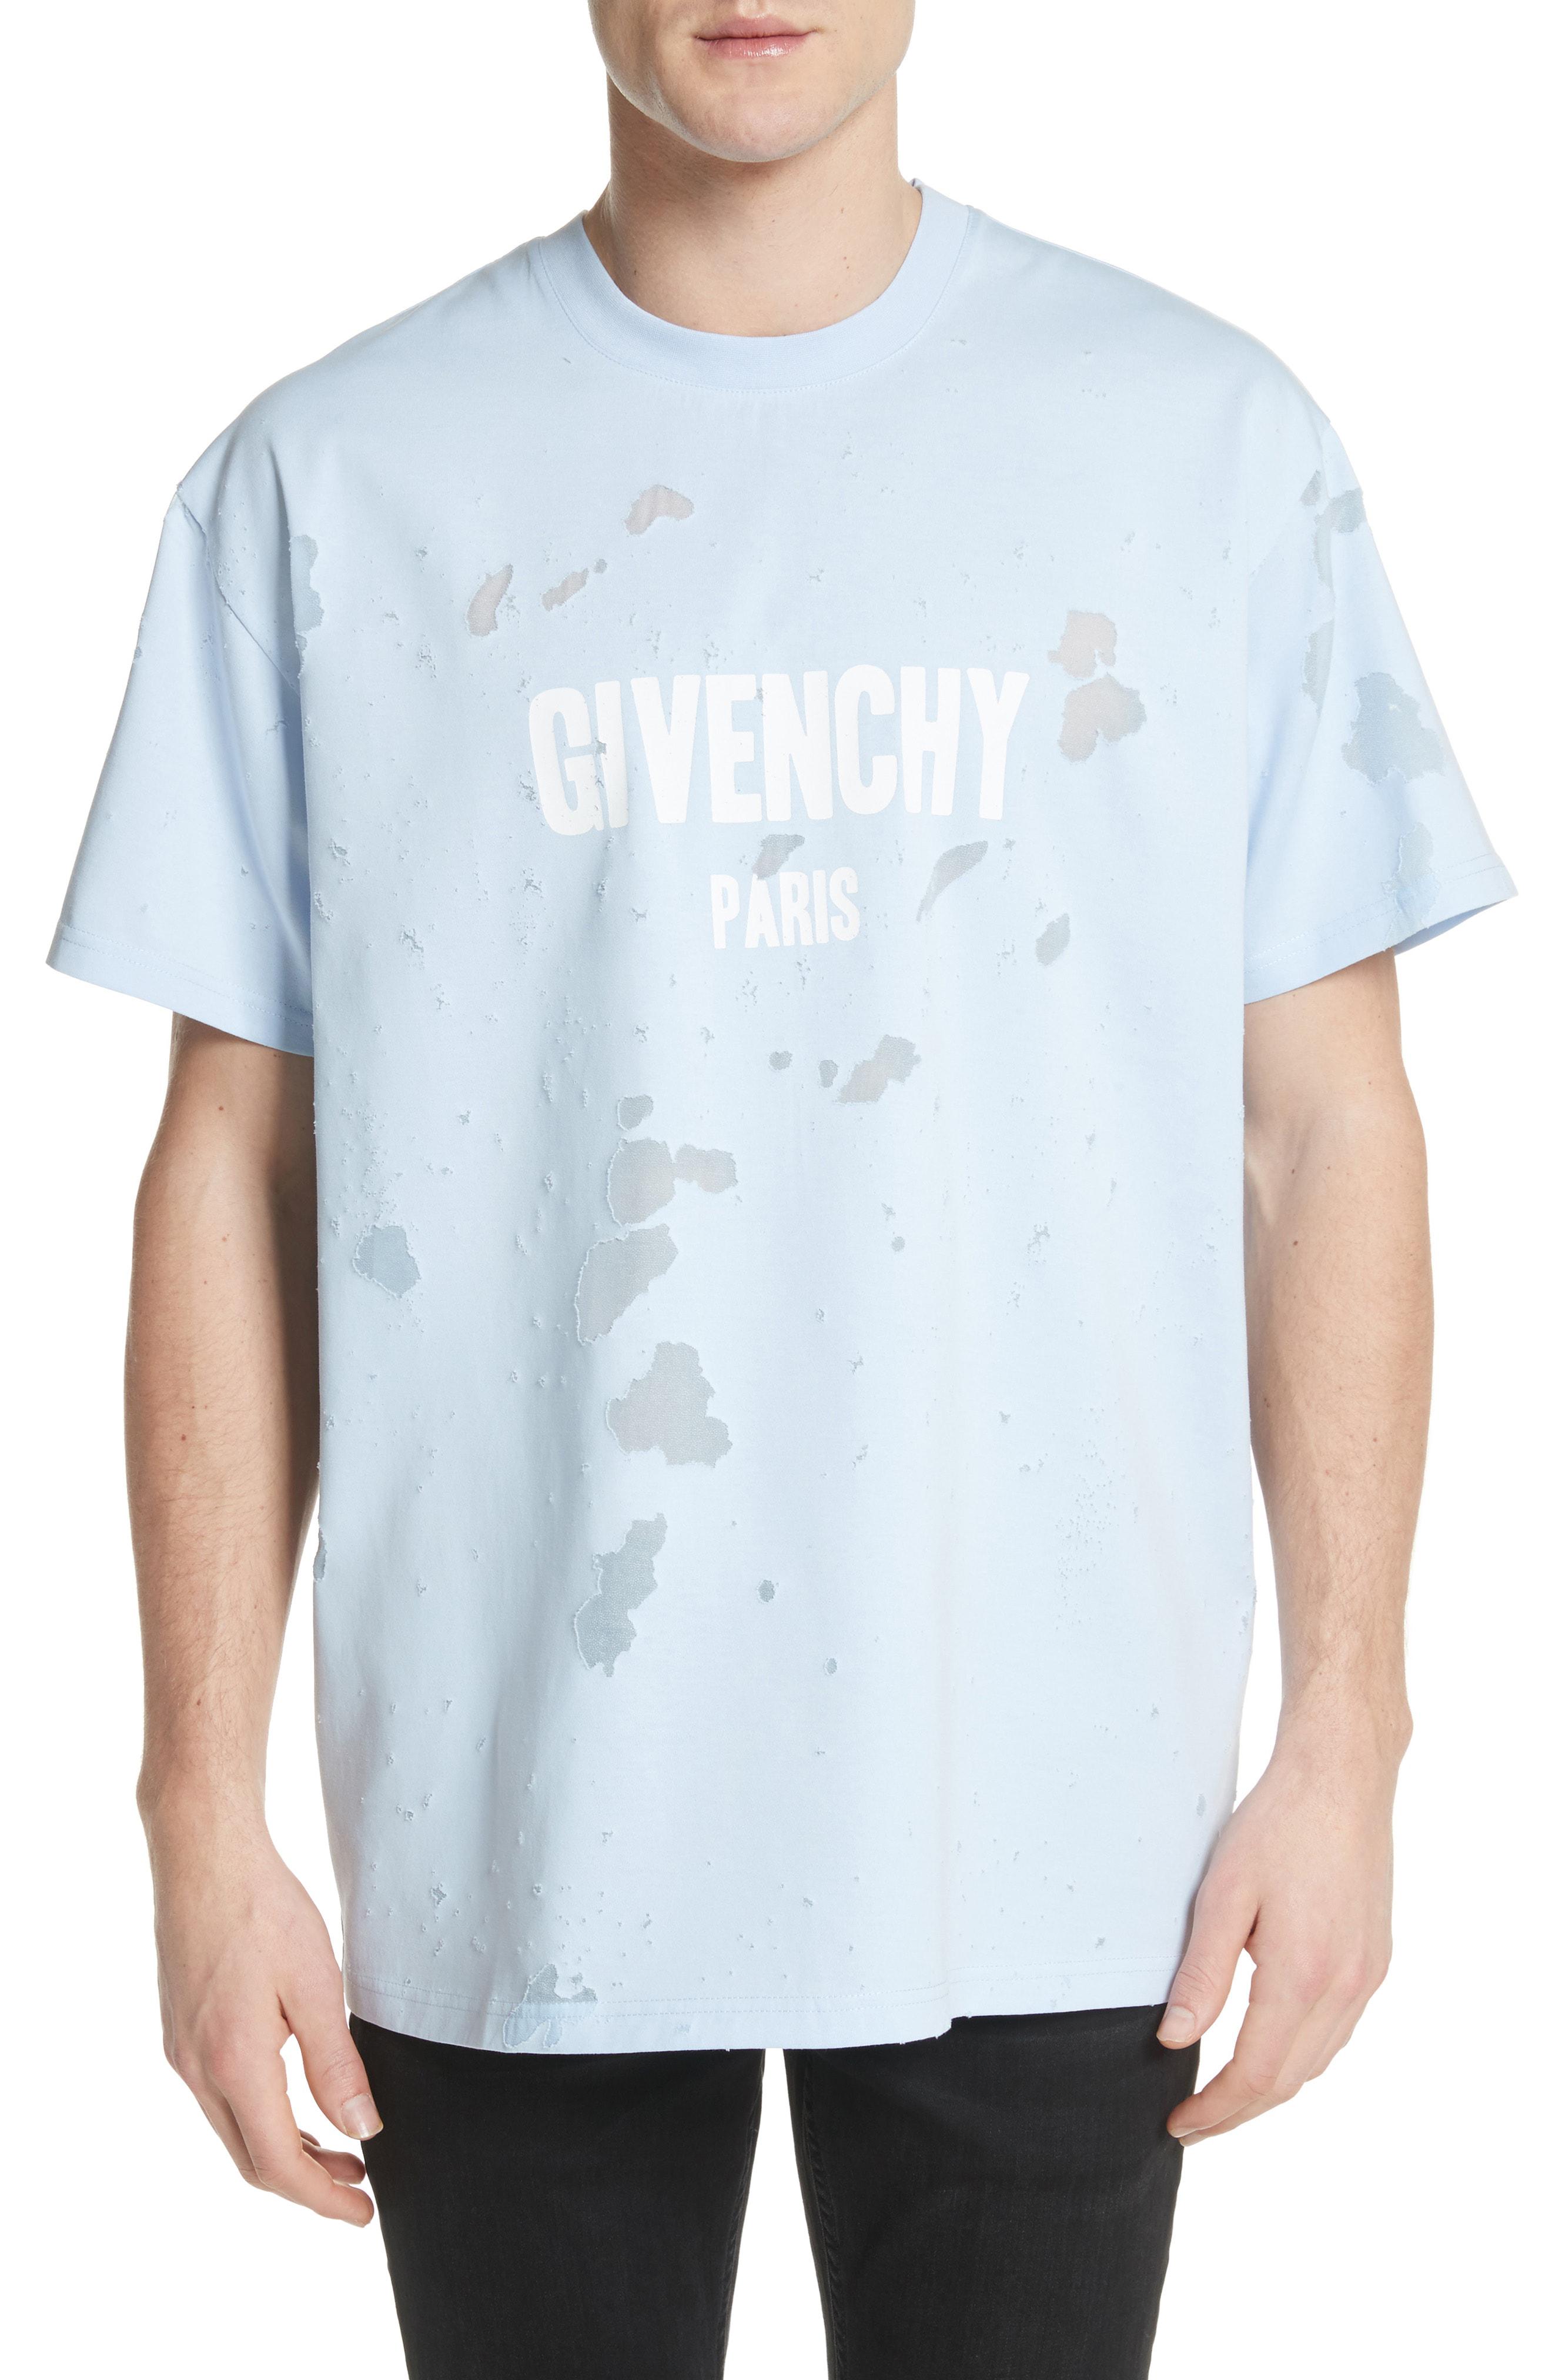 Givenchy Cotton Destroyed Logo Graphic T-shirt in Blue for Men - Lyst